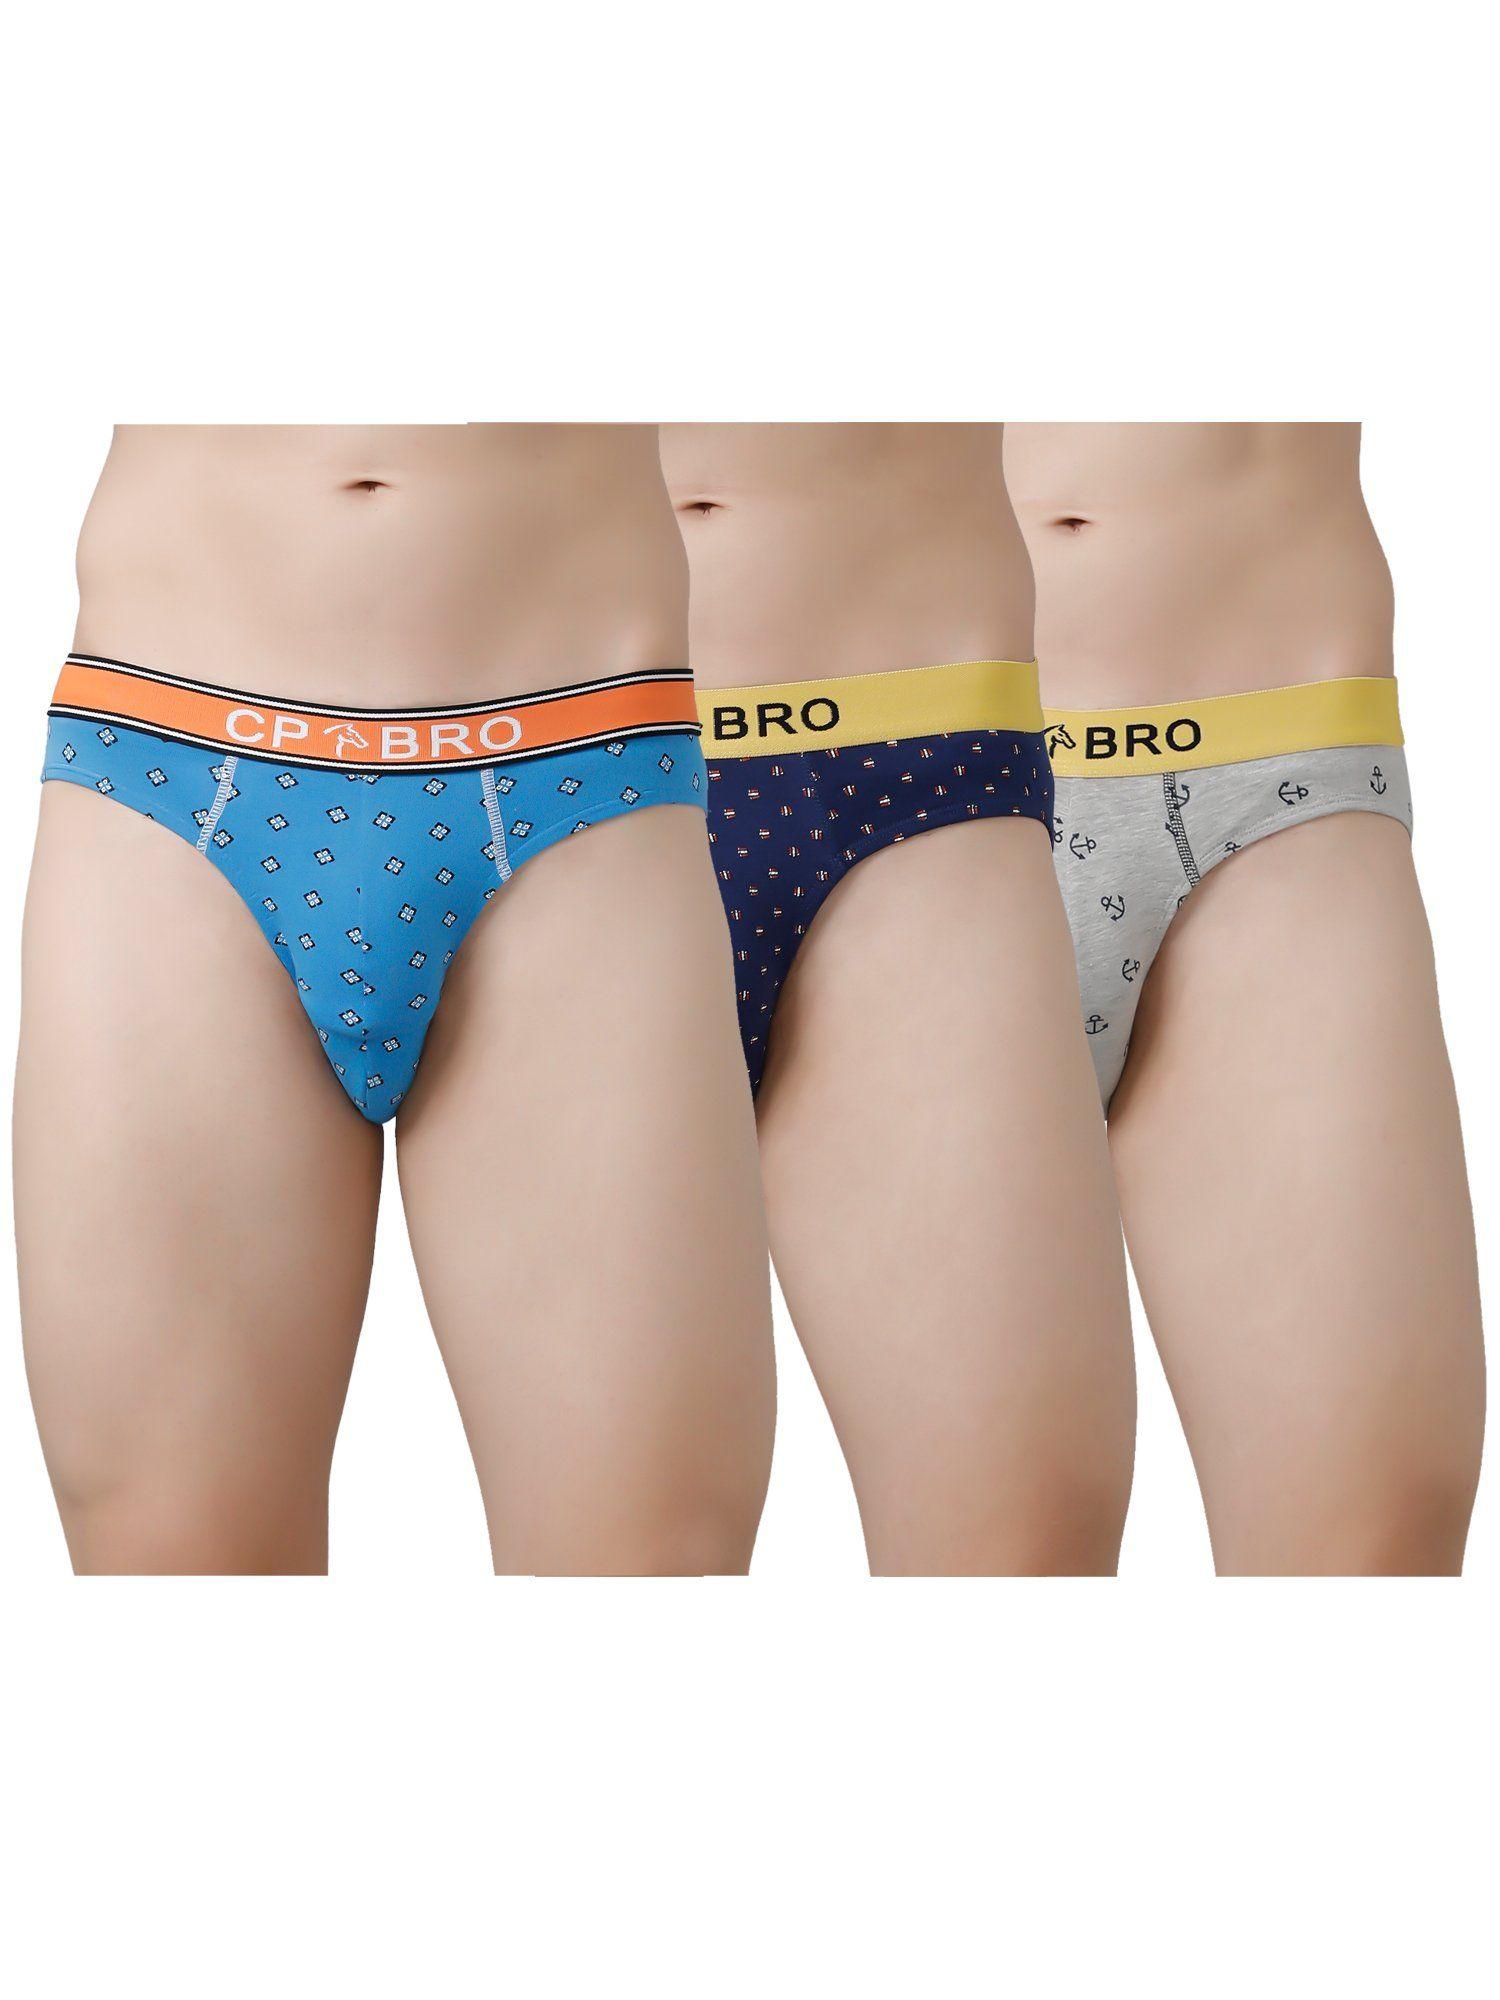 printed briefs with exposed waistband value - multi color (pack of 3)